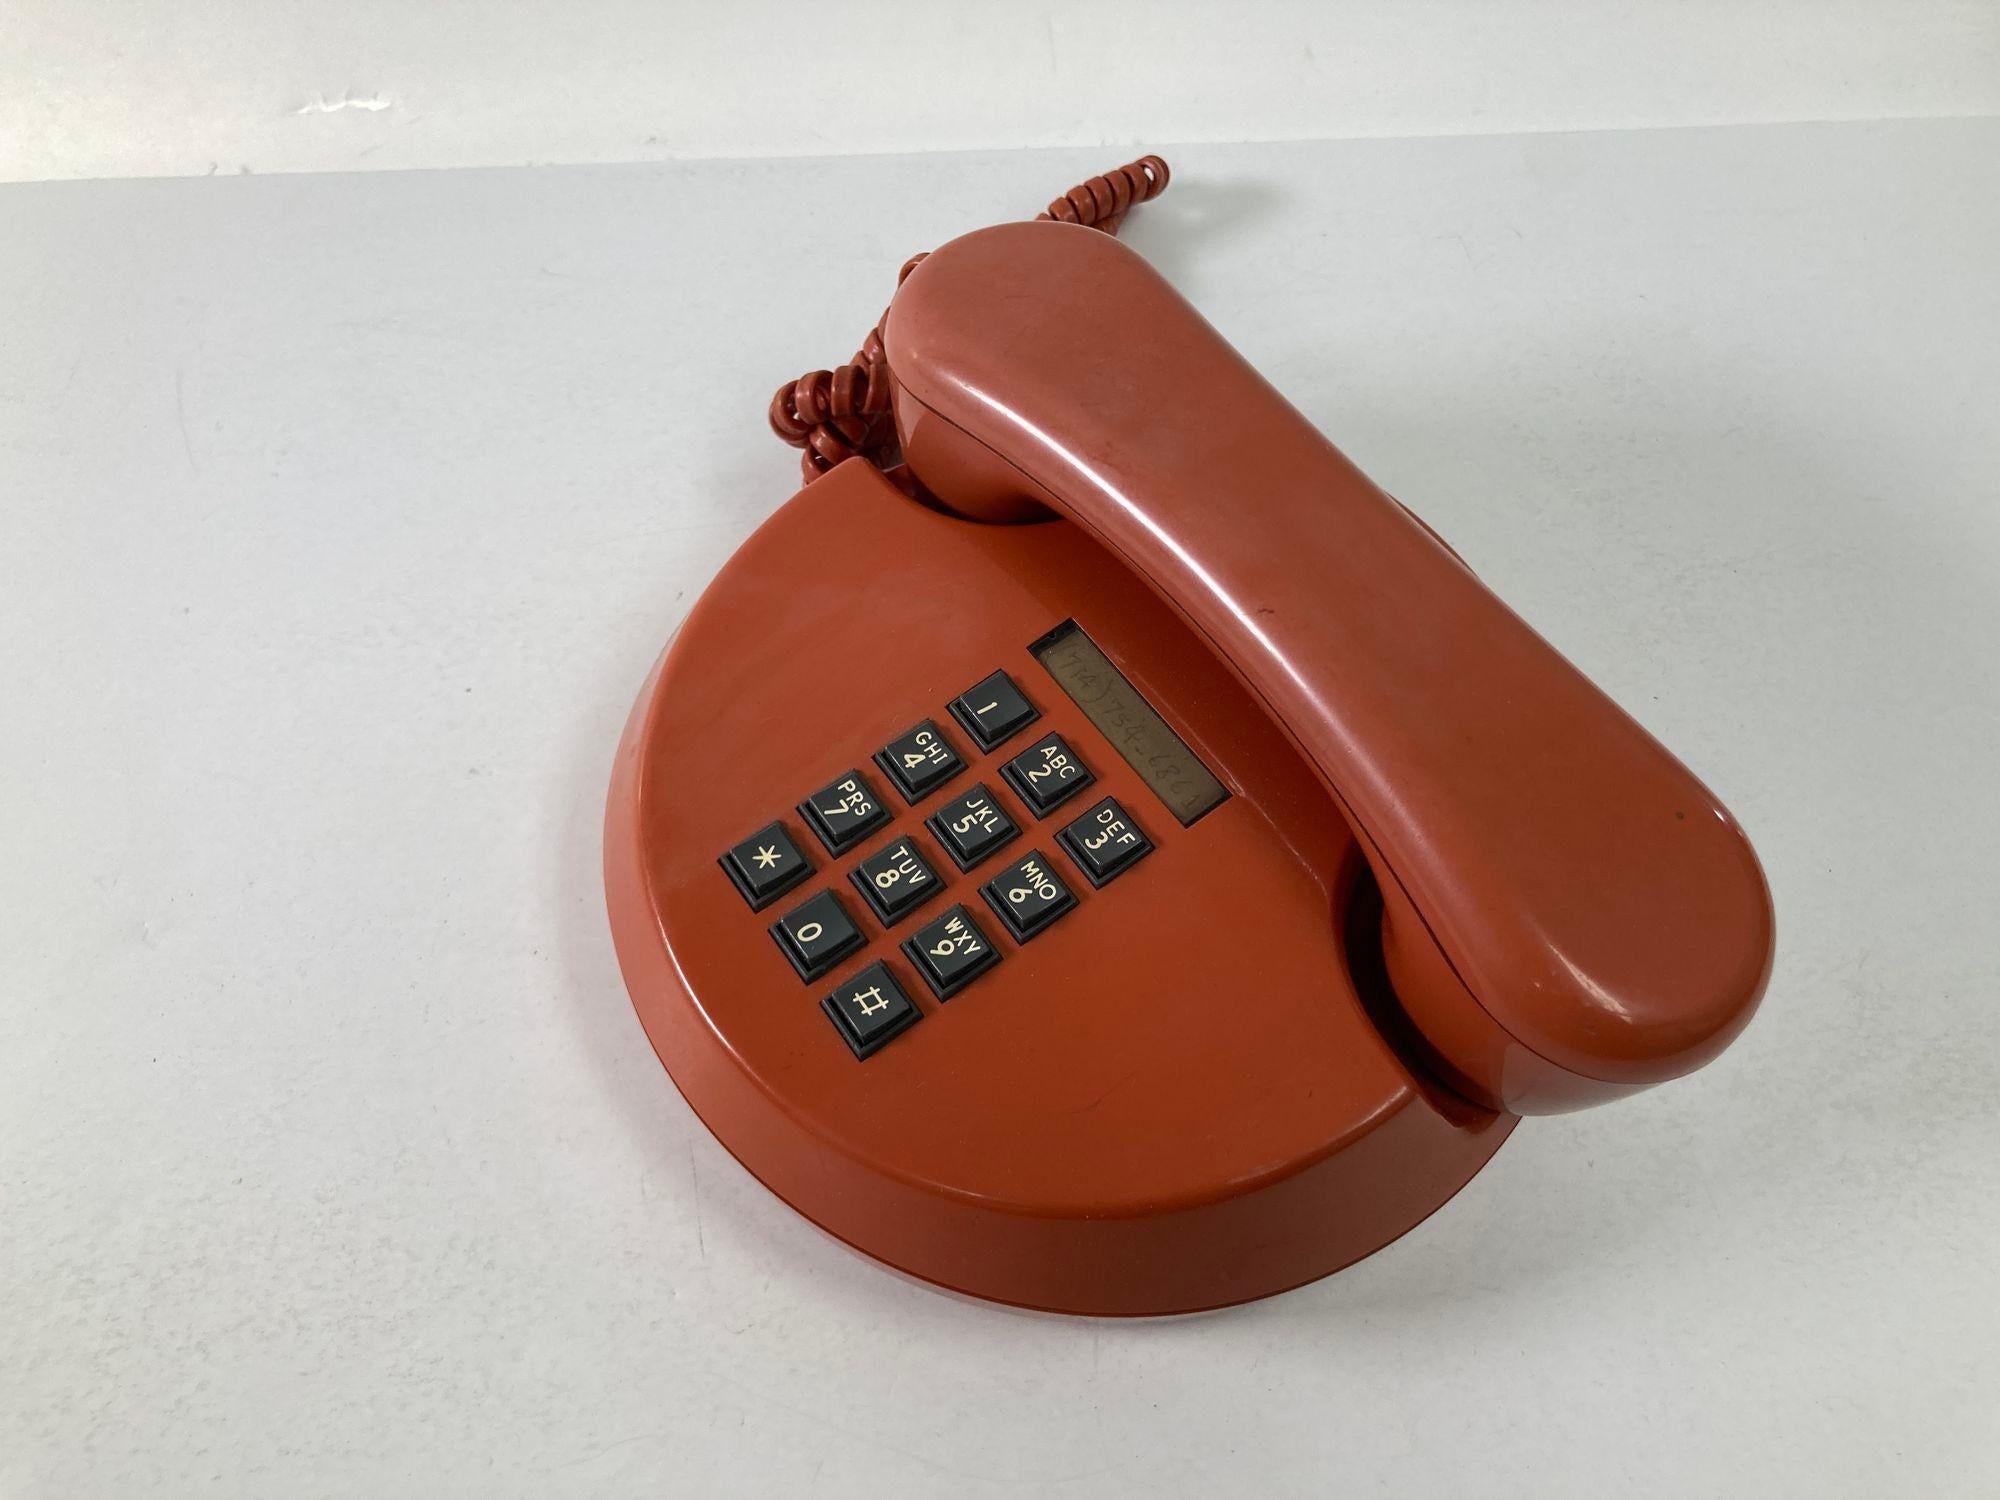 Vintage Retro Push-Button Round Telephone Burnt Orange Color from the, 70s 7